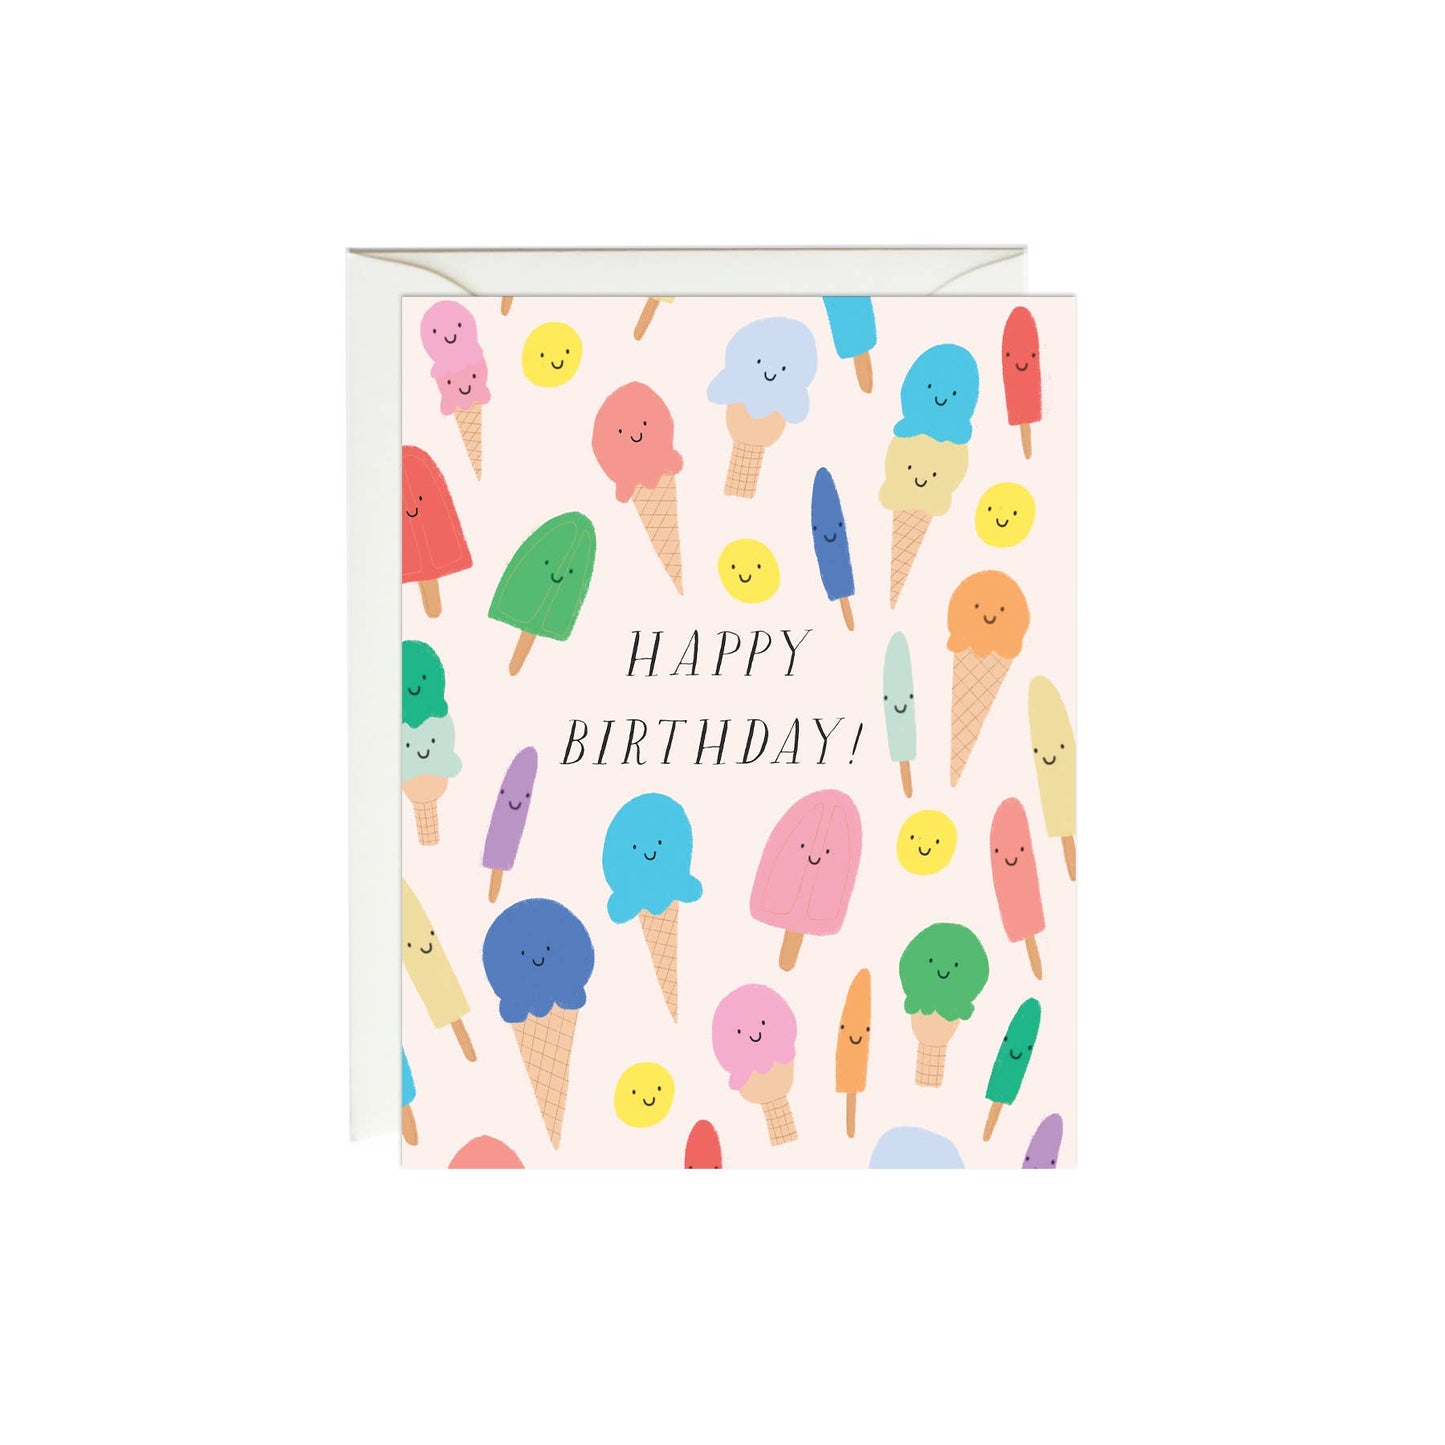 Birthday greeting card that reads "Happy Birthday!" and has different ice cream treats all over 